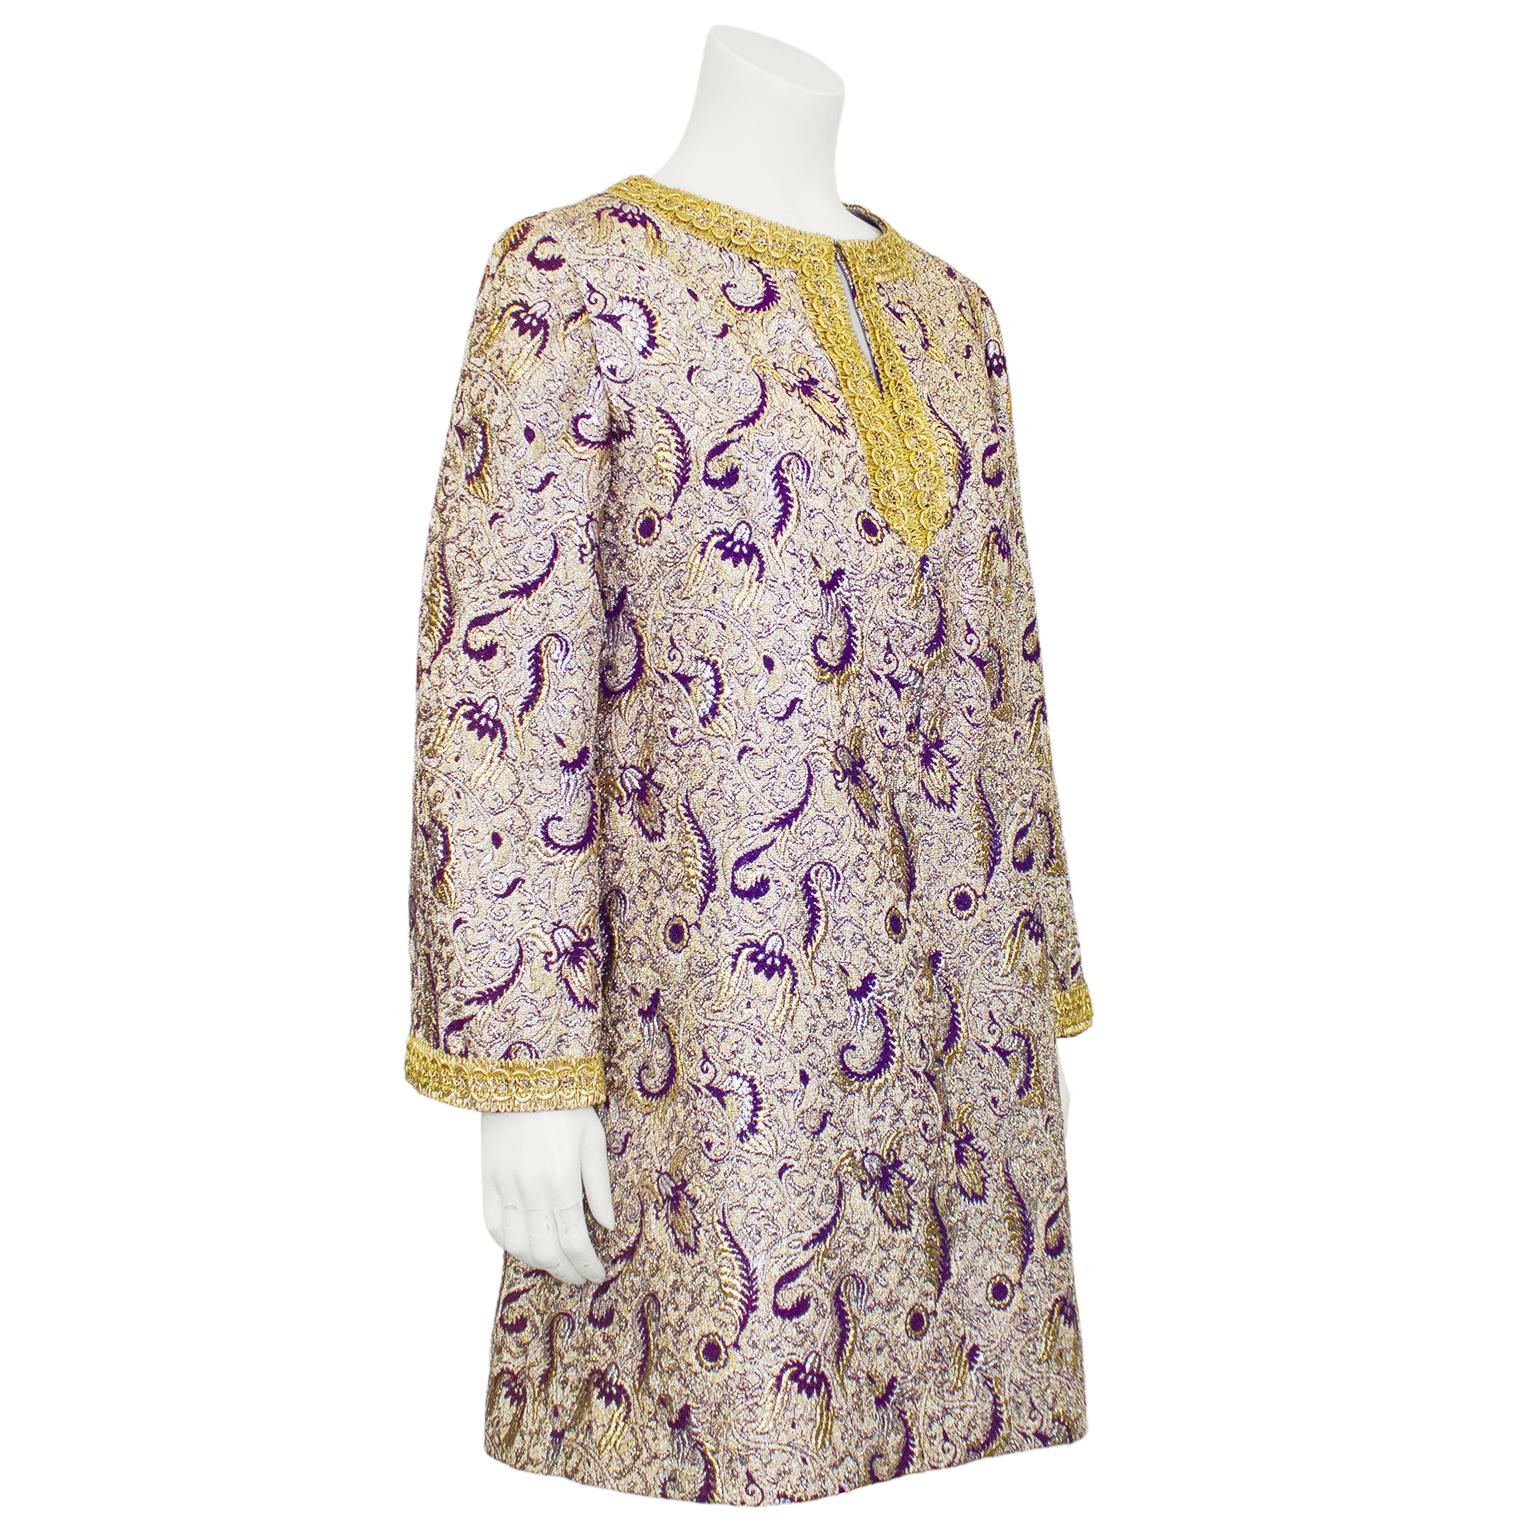 Ready for the holidays. Stunning purple and gold paisley pattern brocade tunic/mini dress. Wear this for any occasion from holiday party friends wedding. Wear as a mini or top over your choice of pants, leggings or fishnet stockings. In excellent